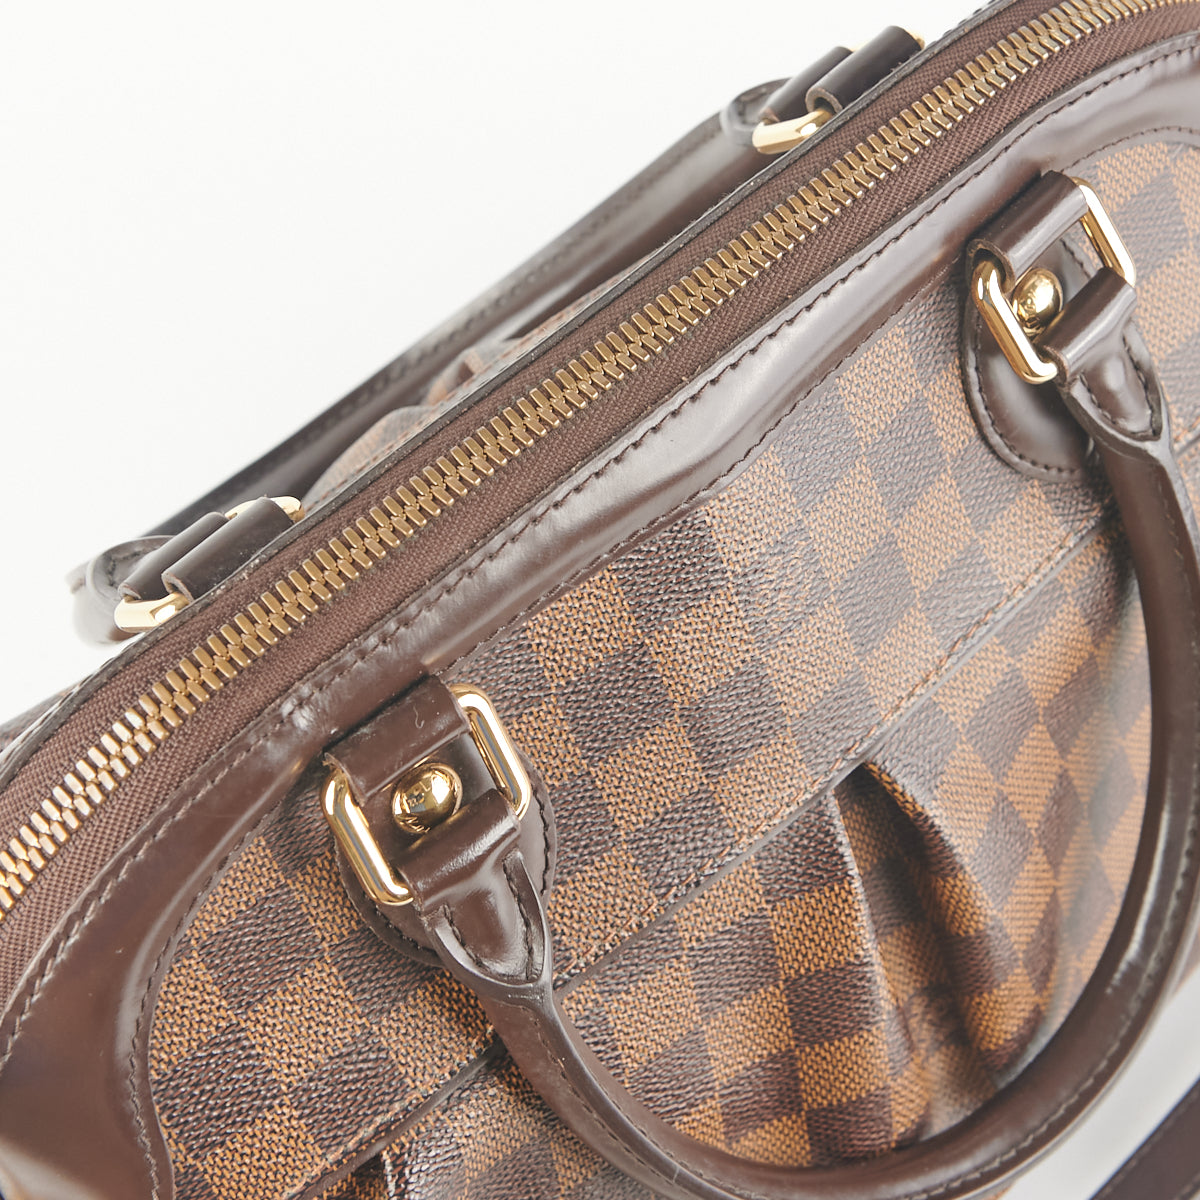 Louis Vuitton Trevi Pm Damier and Pf Sarah Nm2 Damier for Sale in